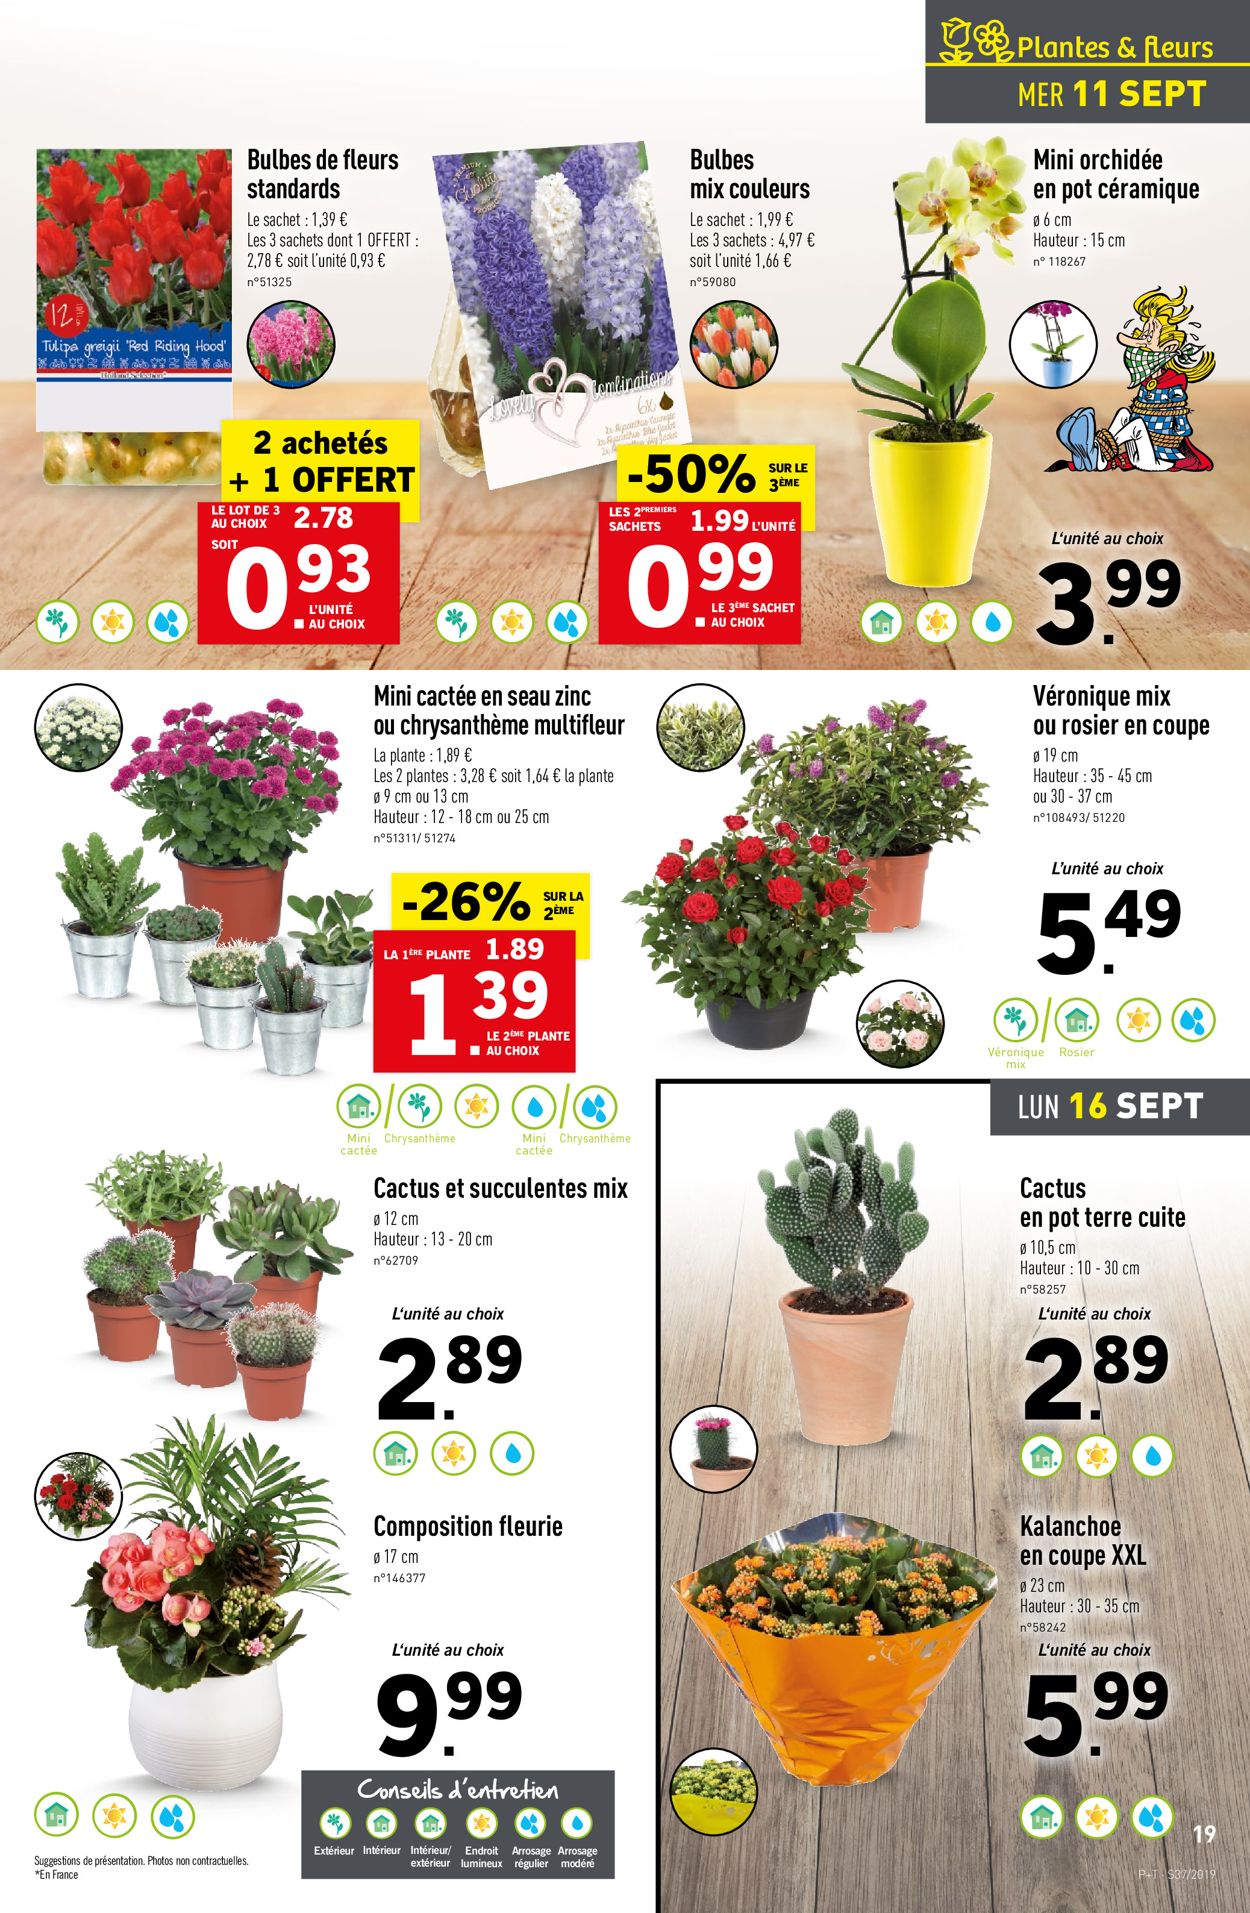 Lidl Catalogue - 11.09-17.09.2019 (Page 19)